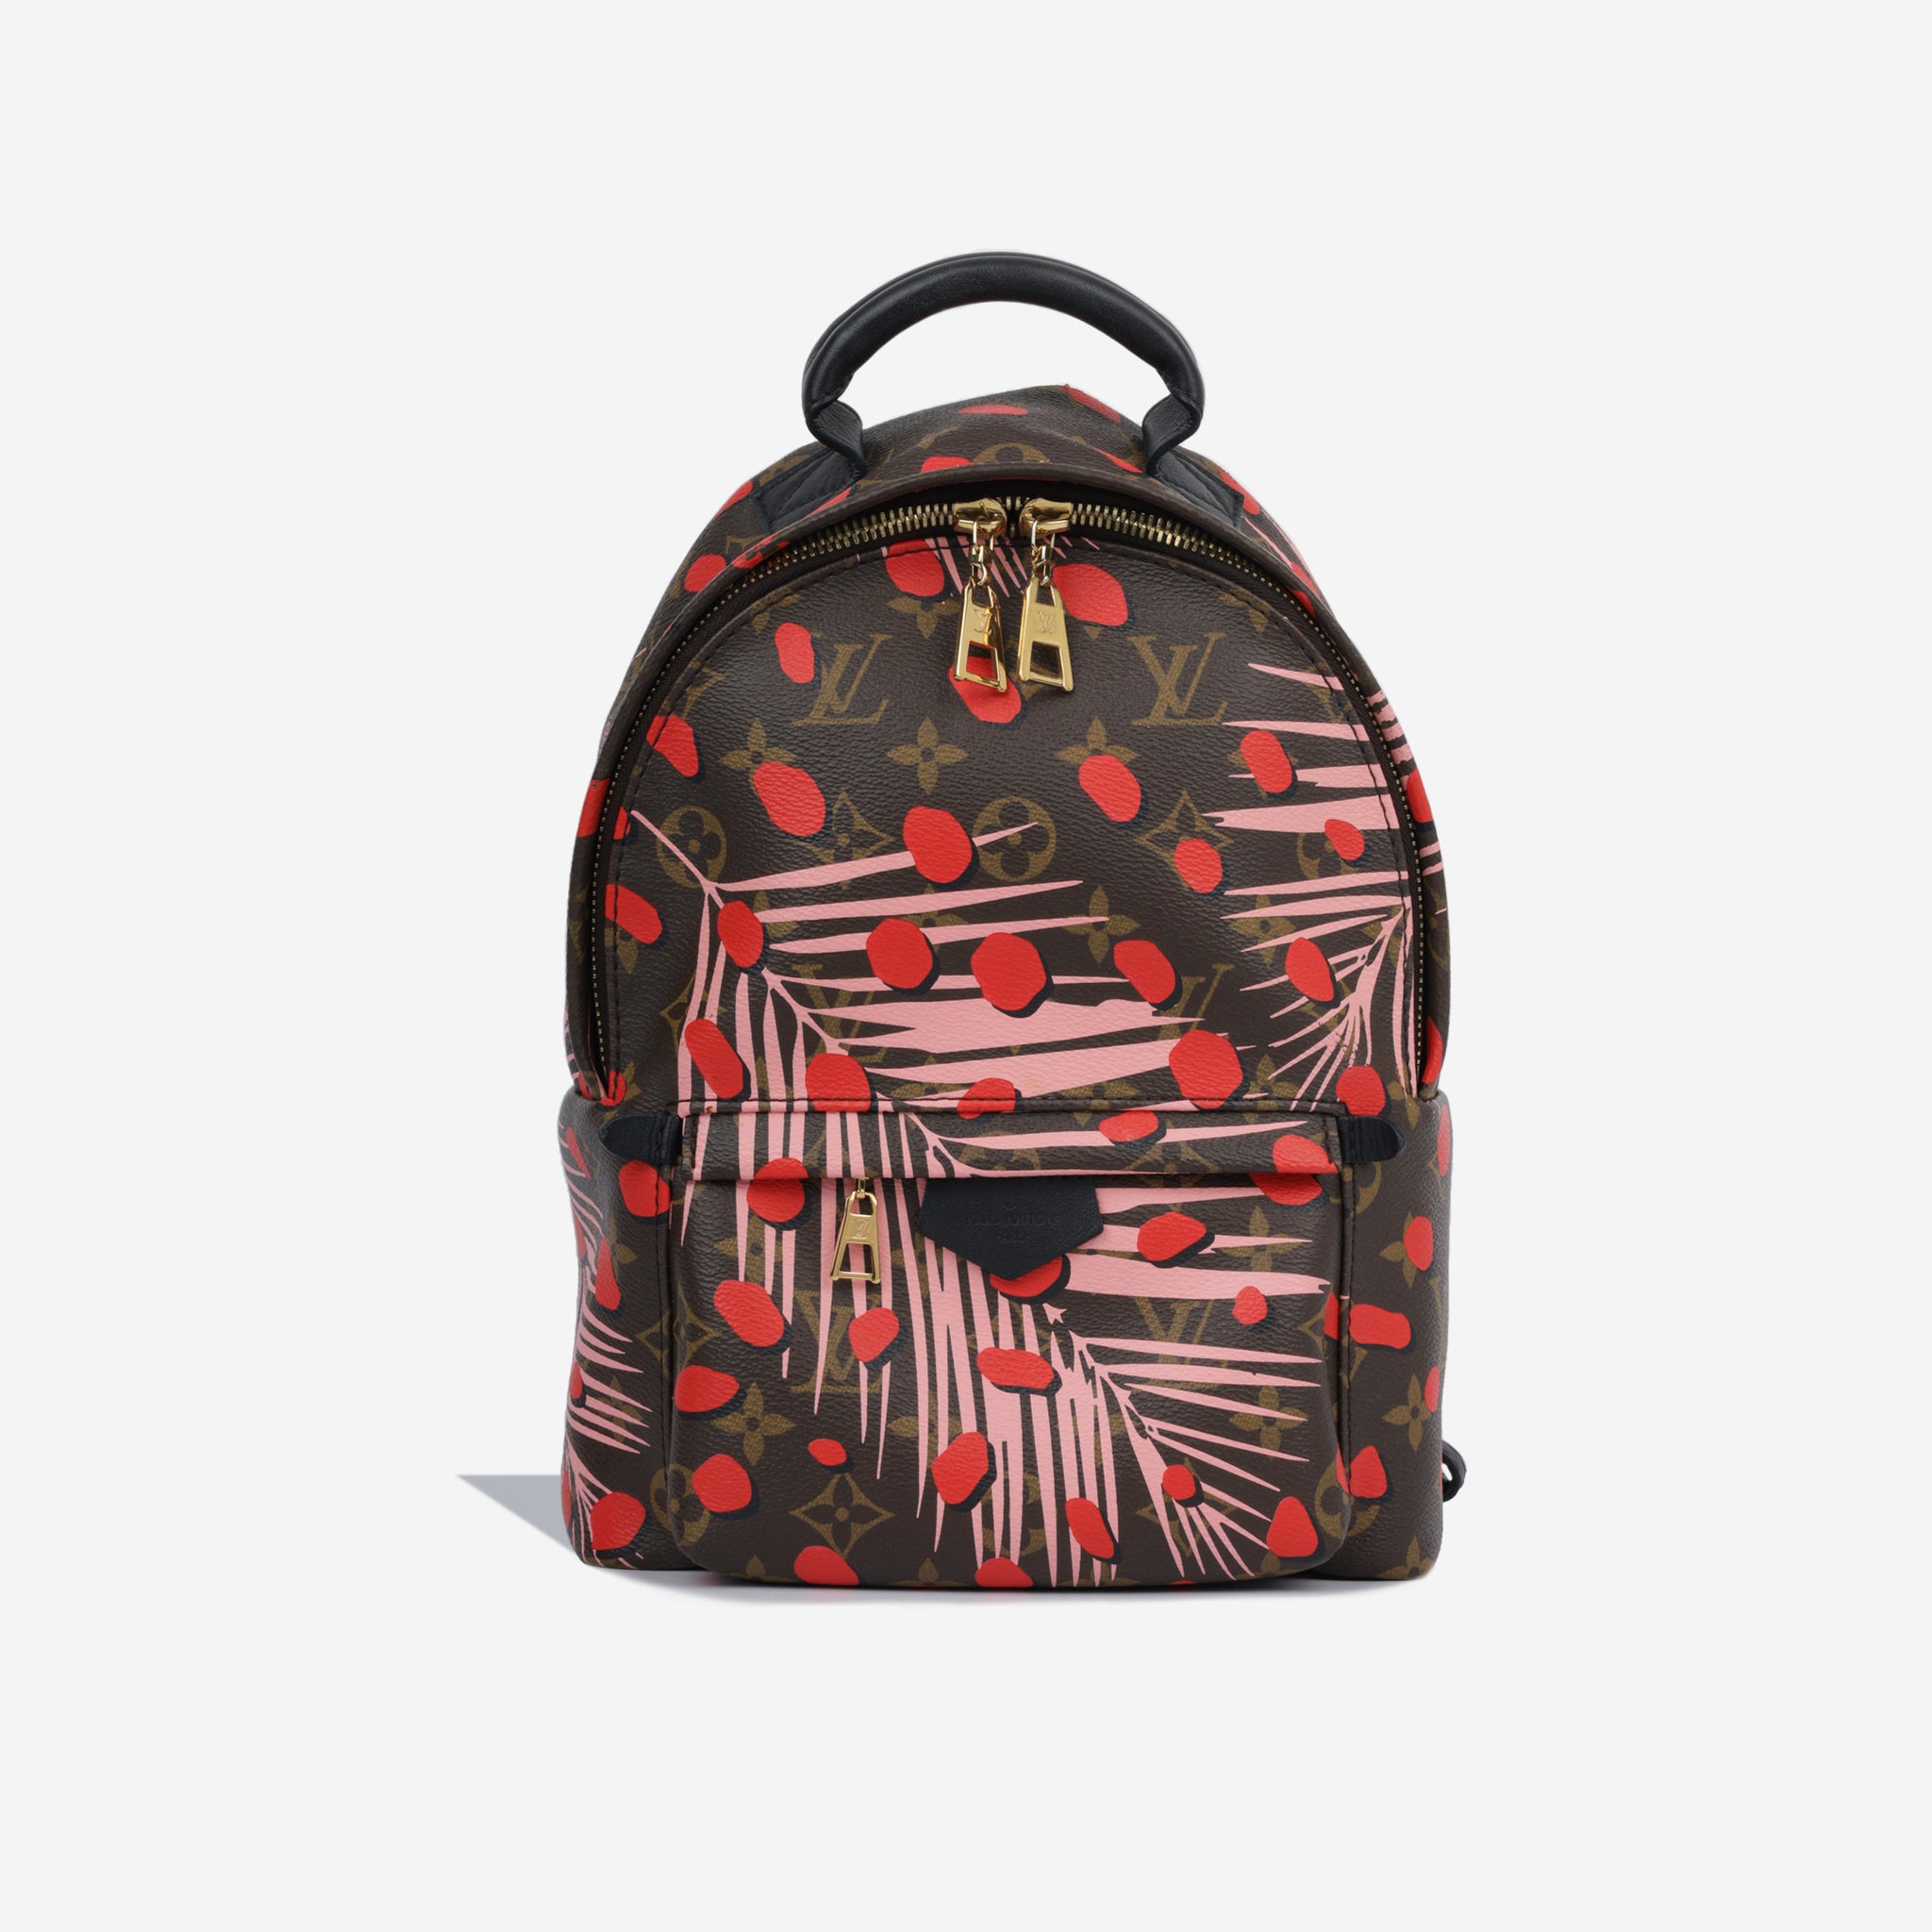 LOUIS VUITTON M41981 Monogram Palm Springs PM Jungle dot Backpack Brown x  Red